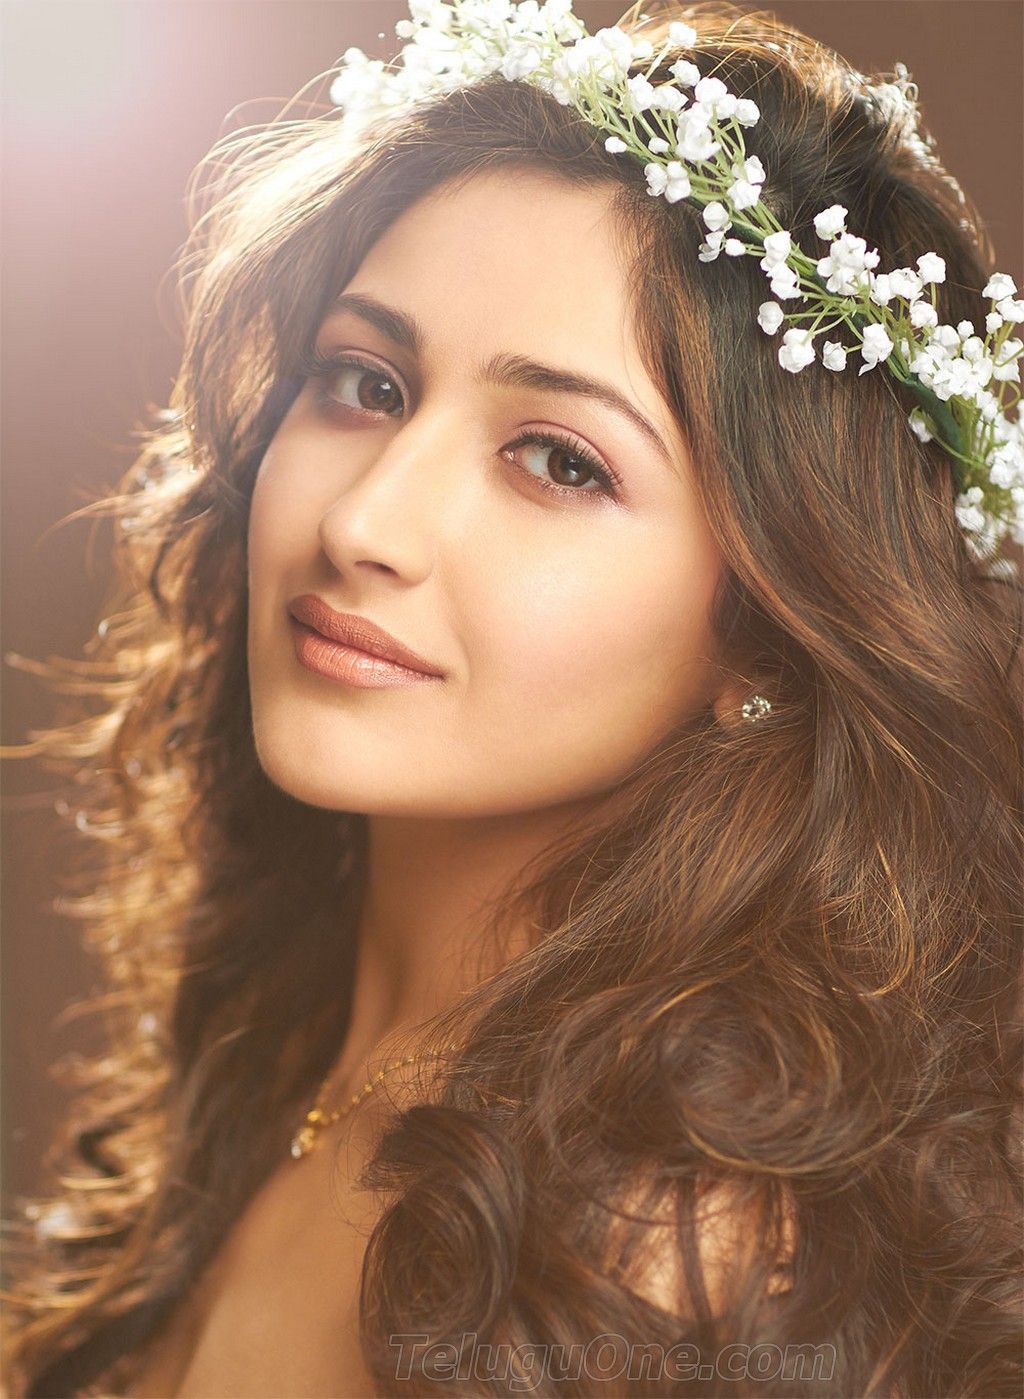 Sayesha Saigal Nude Video - Sayesha Saigal New Hot HD Wallpapers And Images Collections - IndiaWords.com